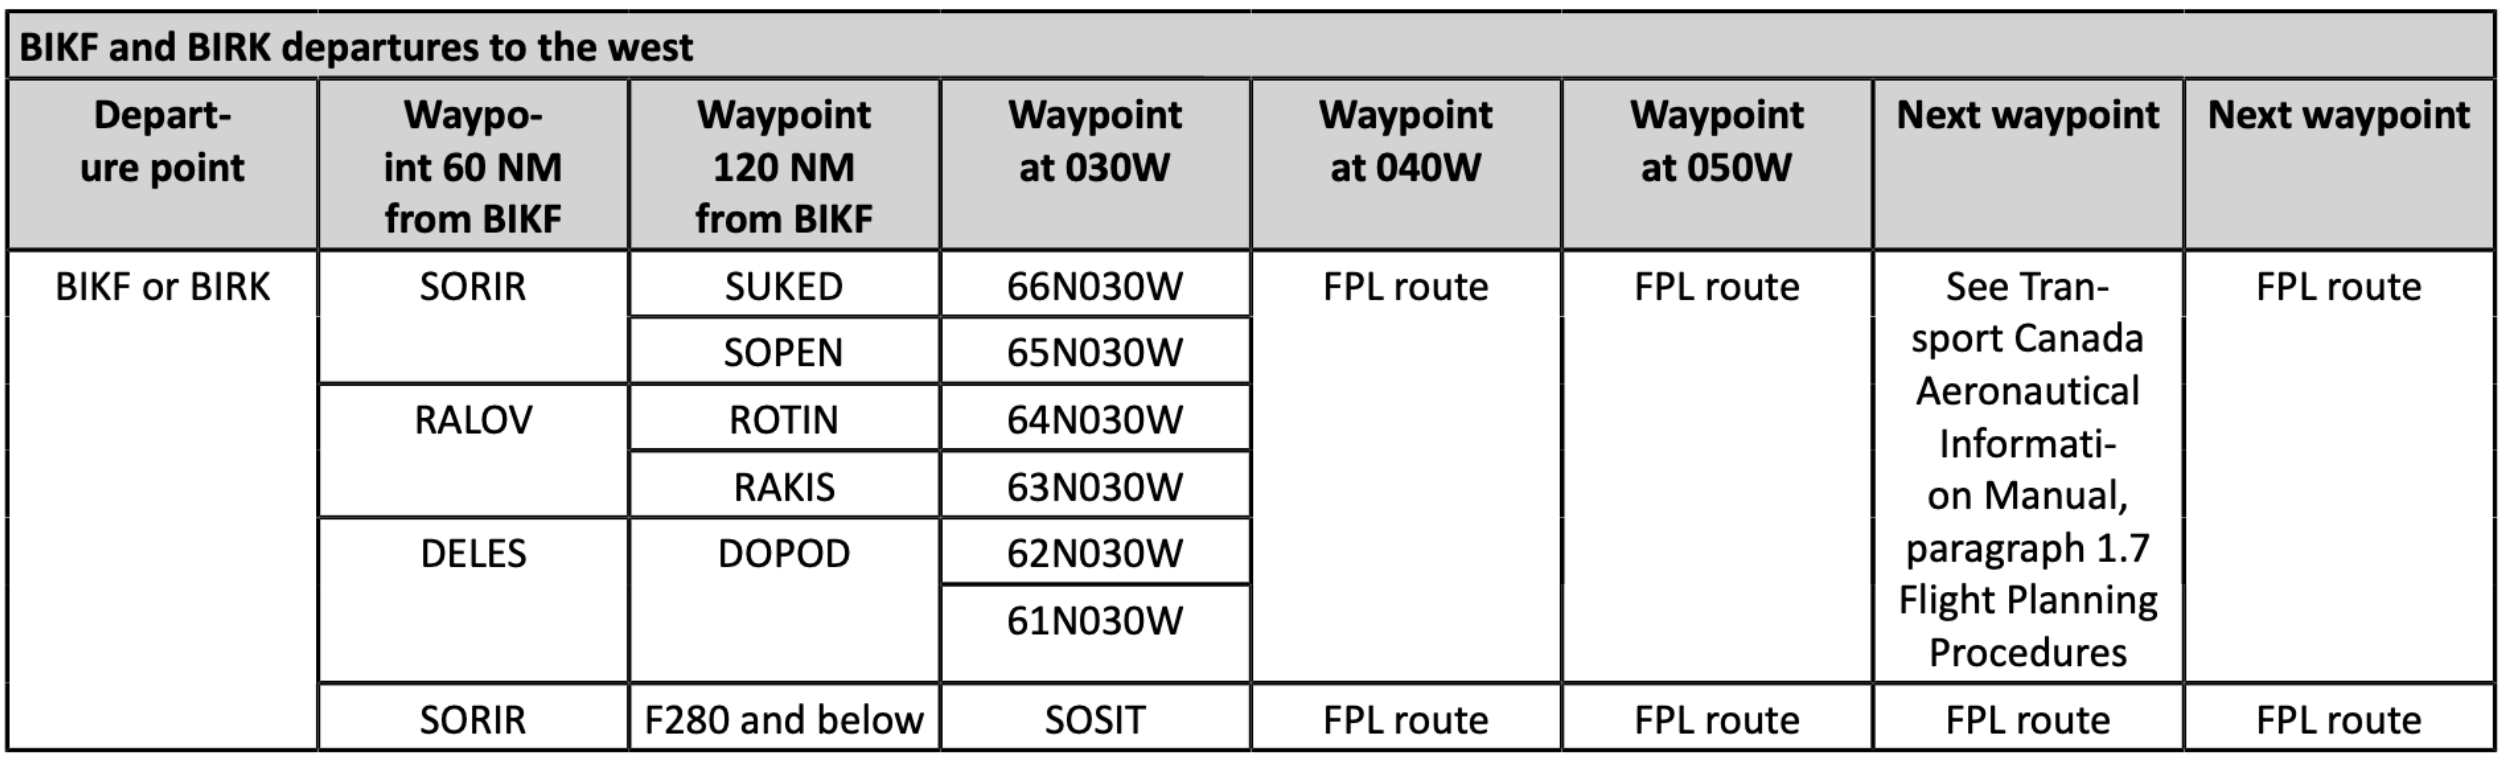 westbound-departures-table.png